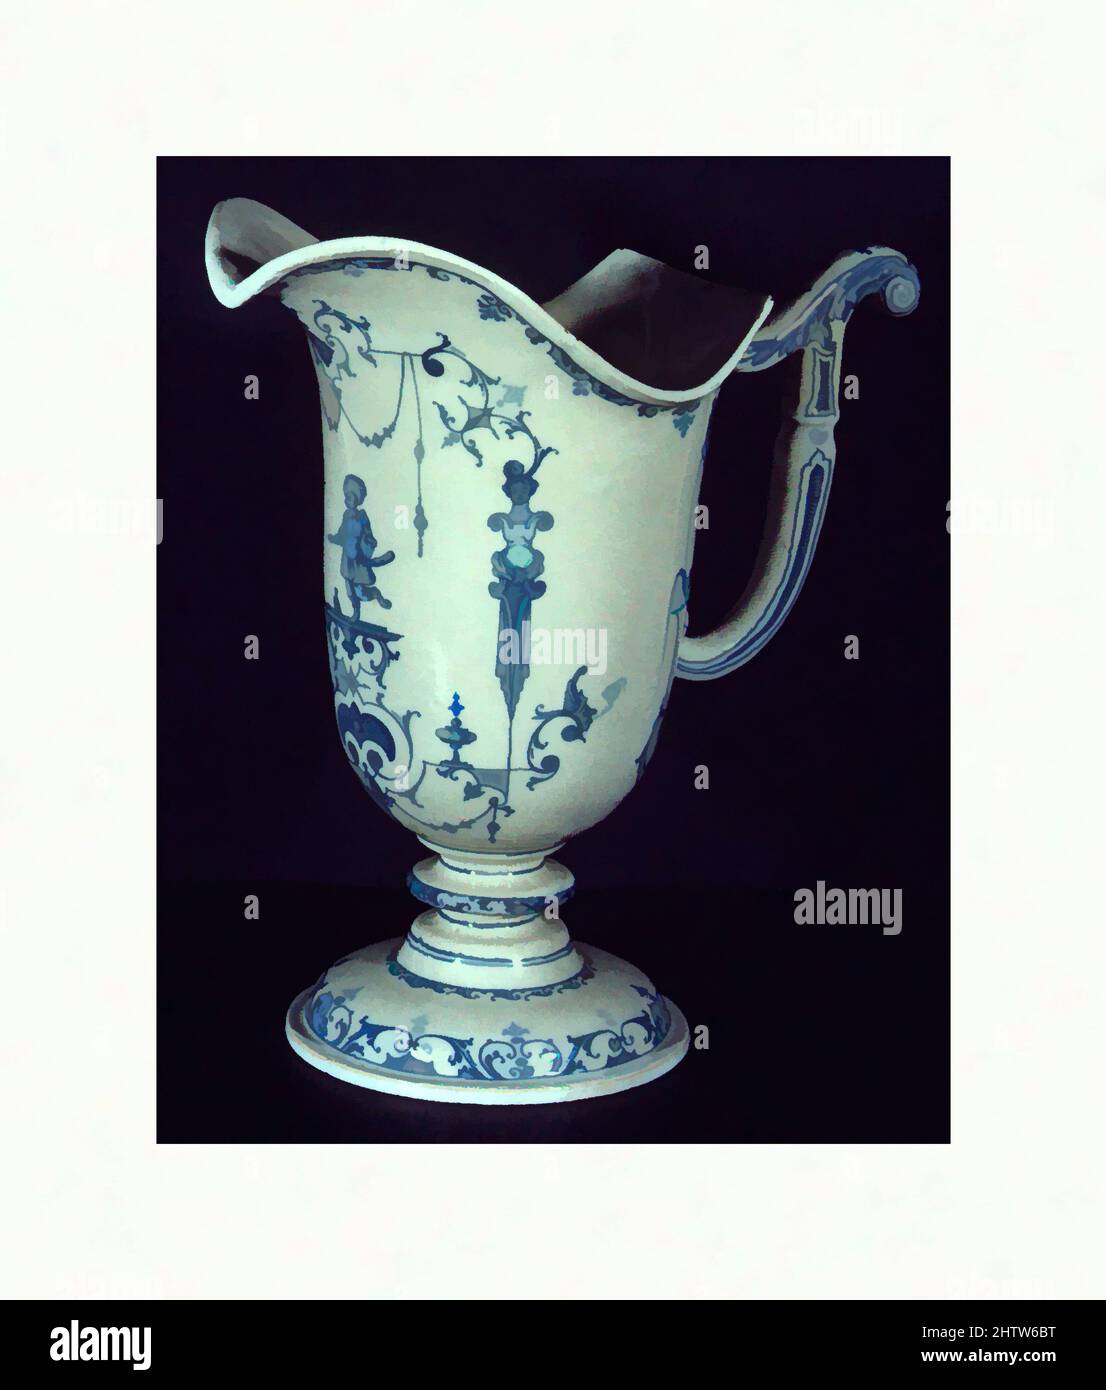 Art inspired by Ewer, ca. 1710–20, French, Moustiers, Faience (tin-glazed earthenware), Height: 11 1/8 in. (28.3 cm), Ceramics-Pottery, The form of this ewer is based on a French silver example, and it is likely that it was originally accompanied by a basin. The painted designs of, Classic works modernized by Artotop with a splash of modernity. Shapes, color and value, eye-catching visual impact on art. Emotions through freedom of artworks in a contemporary way. A timeless message pursuing a wildly creative new direction. Artists turning to the digital medium and creating the Artotop NFT Stock Photo